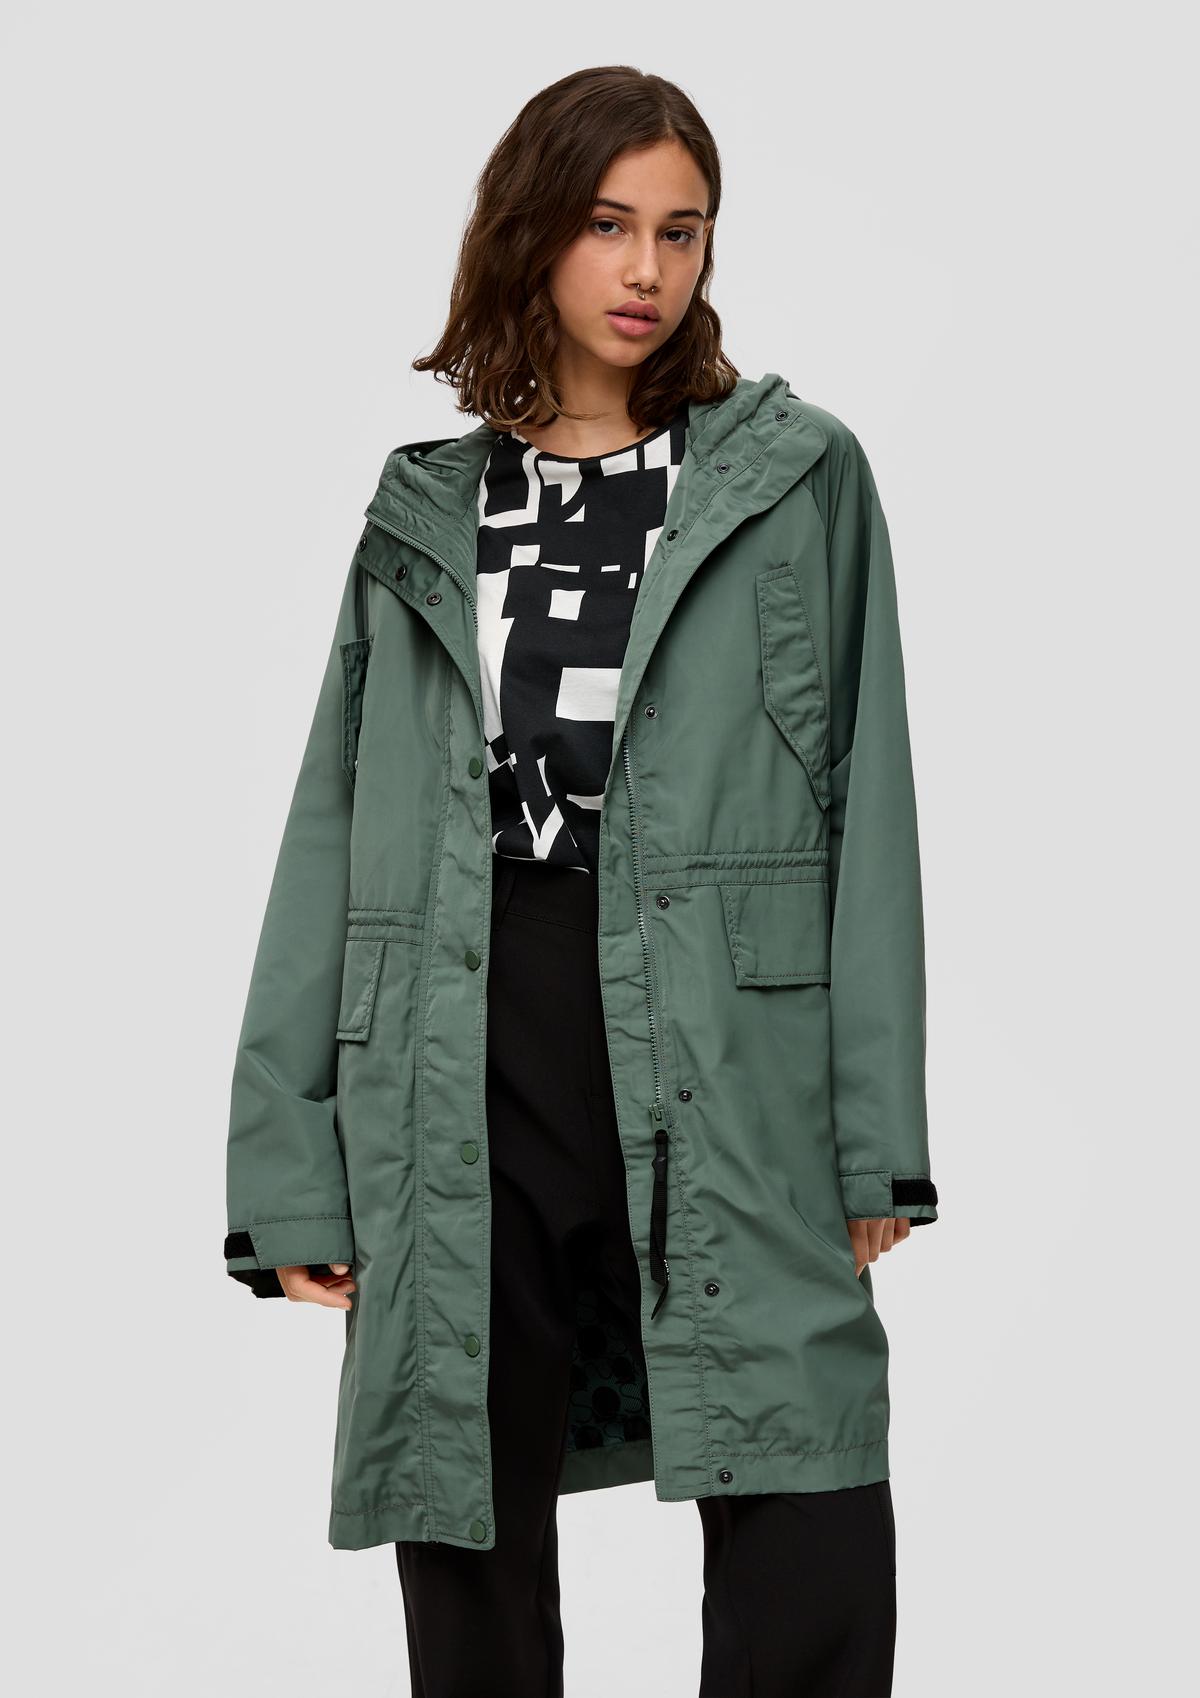 s.Oliver Outdoor coat in an oversized fit